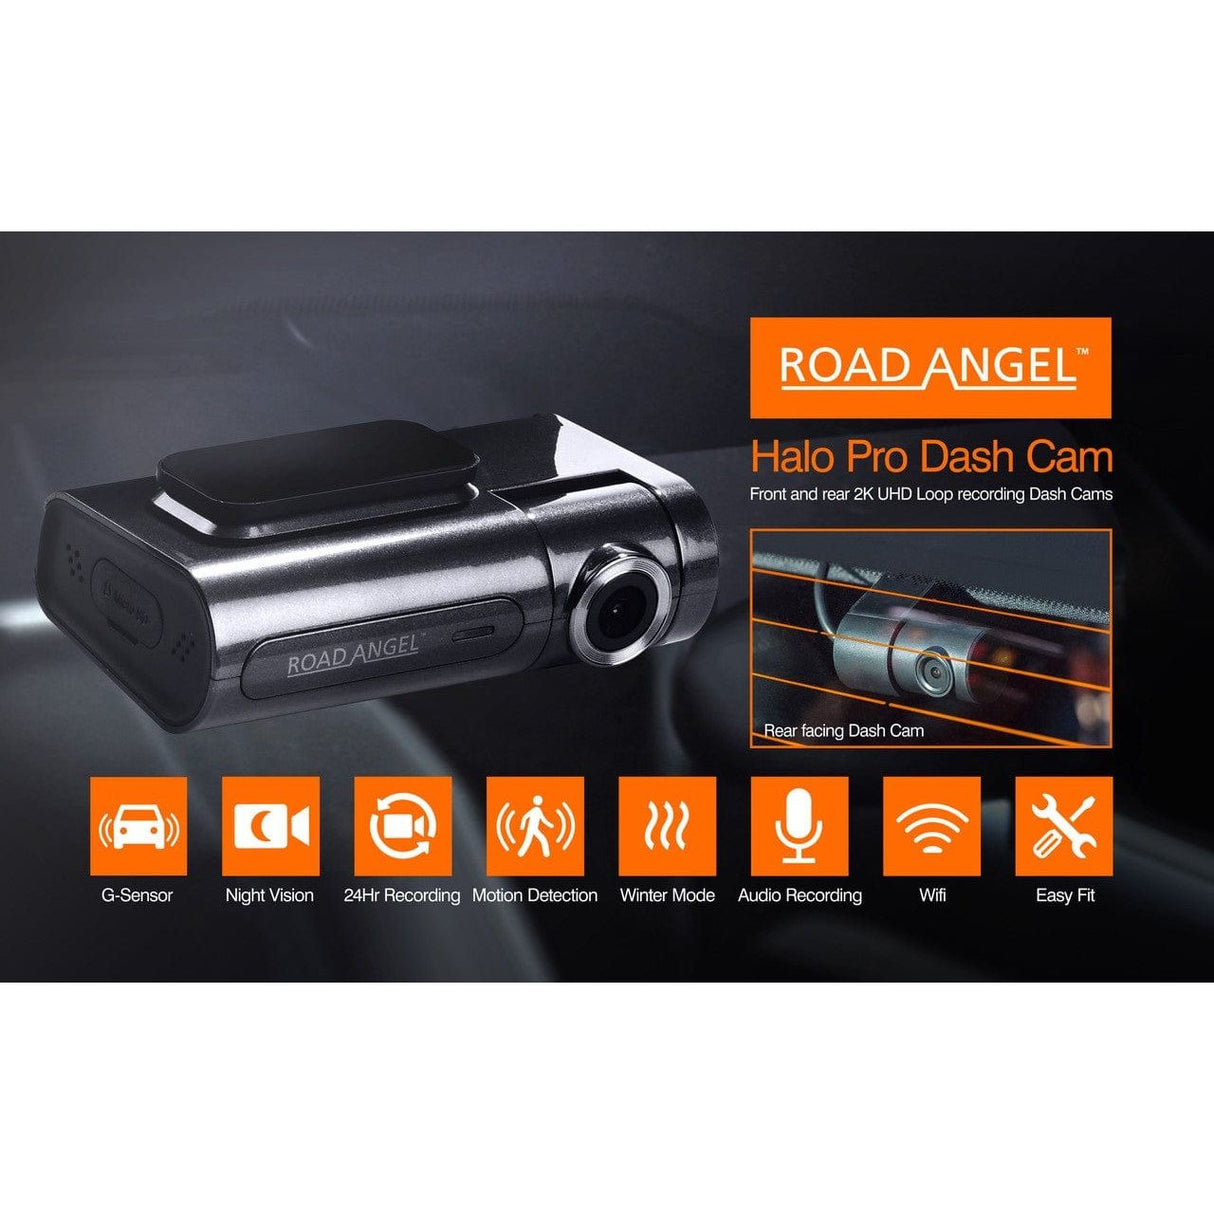 Road Angel Road Safety Road Angel Halo Pro 2K 1440p Dual Dash-Camera, with 140° Front + 120° 1080p Rear Cams, Super Night Vision, Built-in Wi-Fi, Winter Mode with Fitting Kit